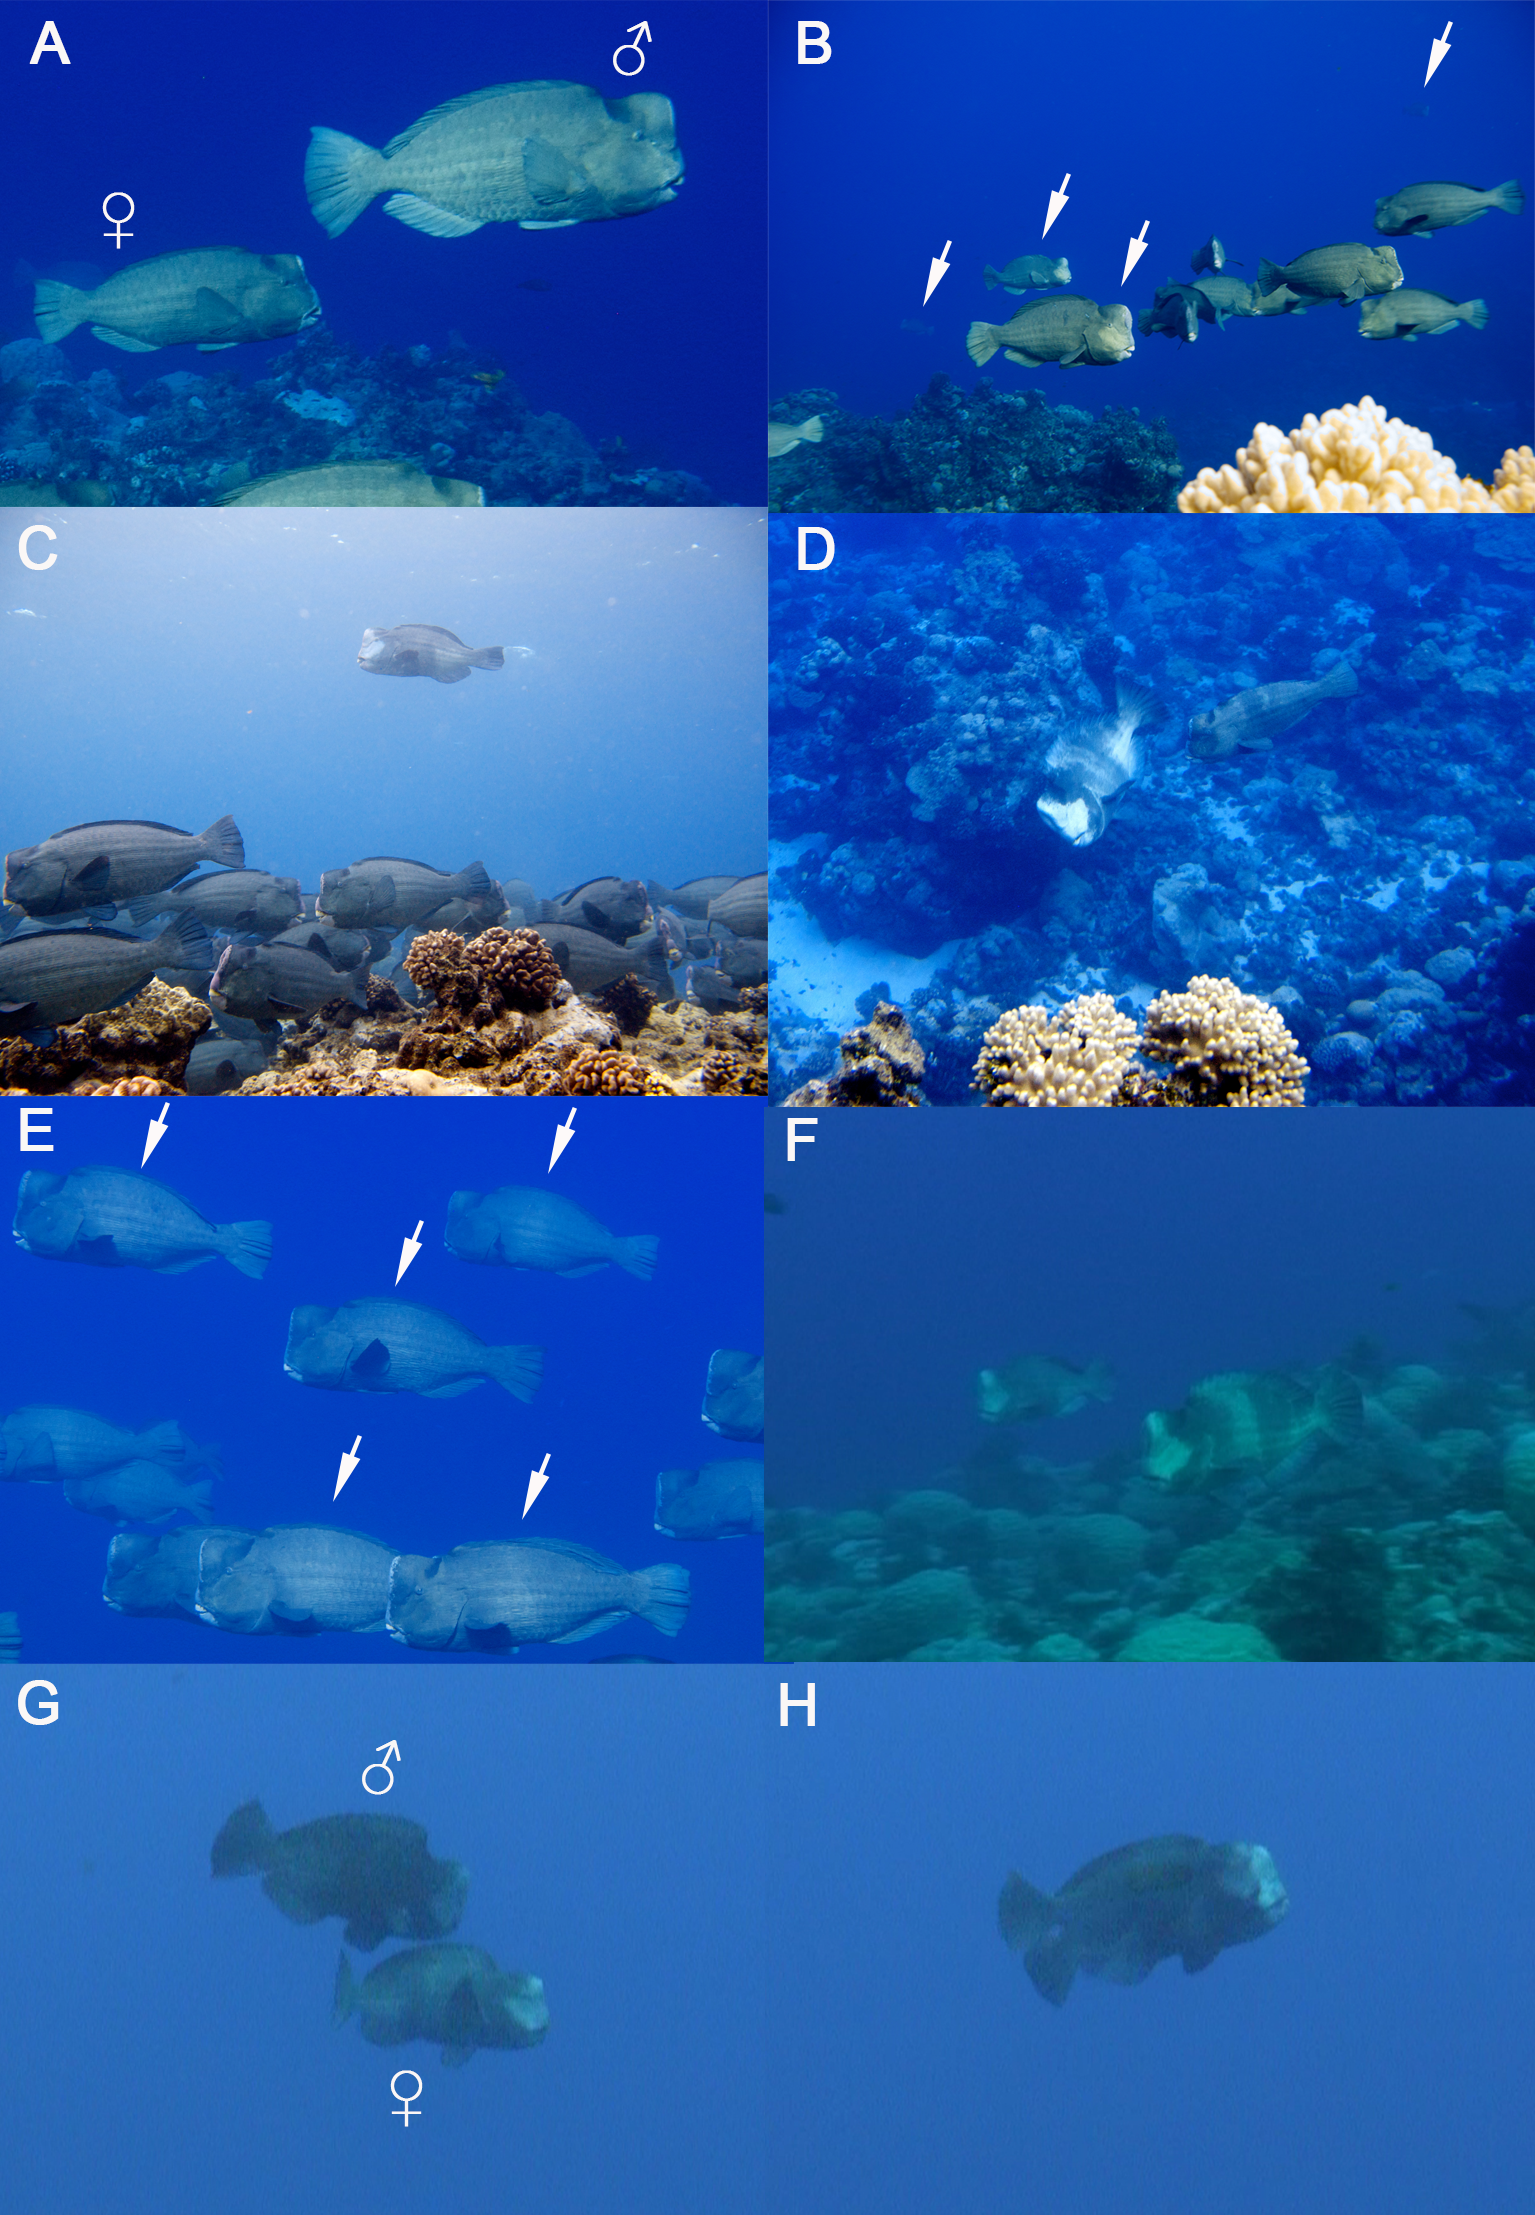 Spawning aggregation behavior and reproductive ecology of the giant  bumphead parrotfish, Bolbometopon muricatum, in a remote marine reserve  [PeerJ]